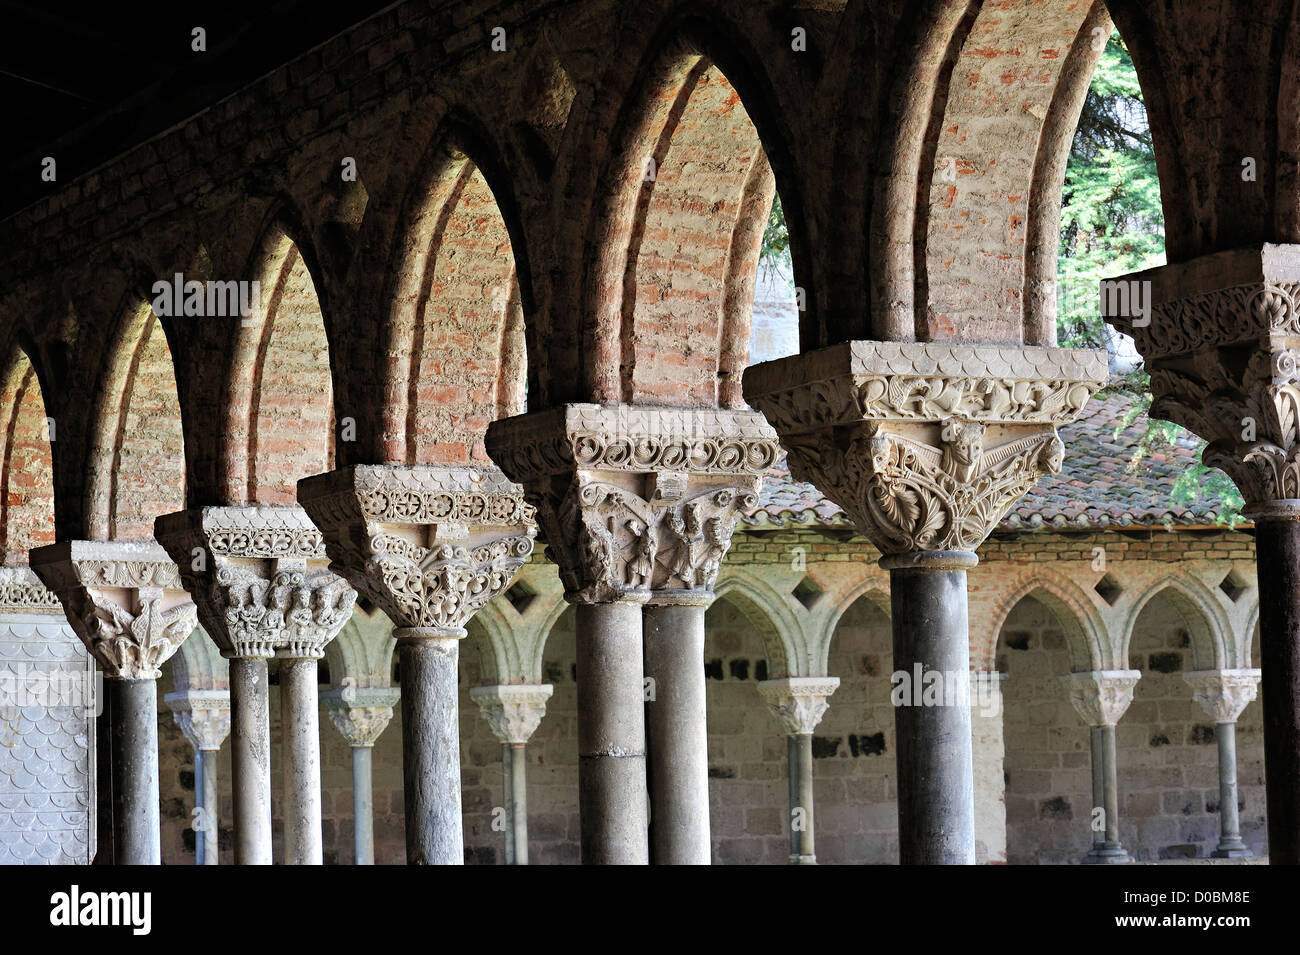 Cloister of the St Pierre abbey, Moissac, France. Stock Photo